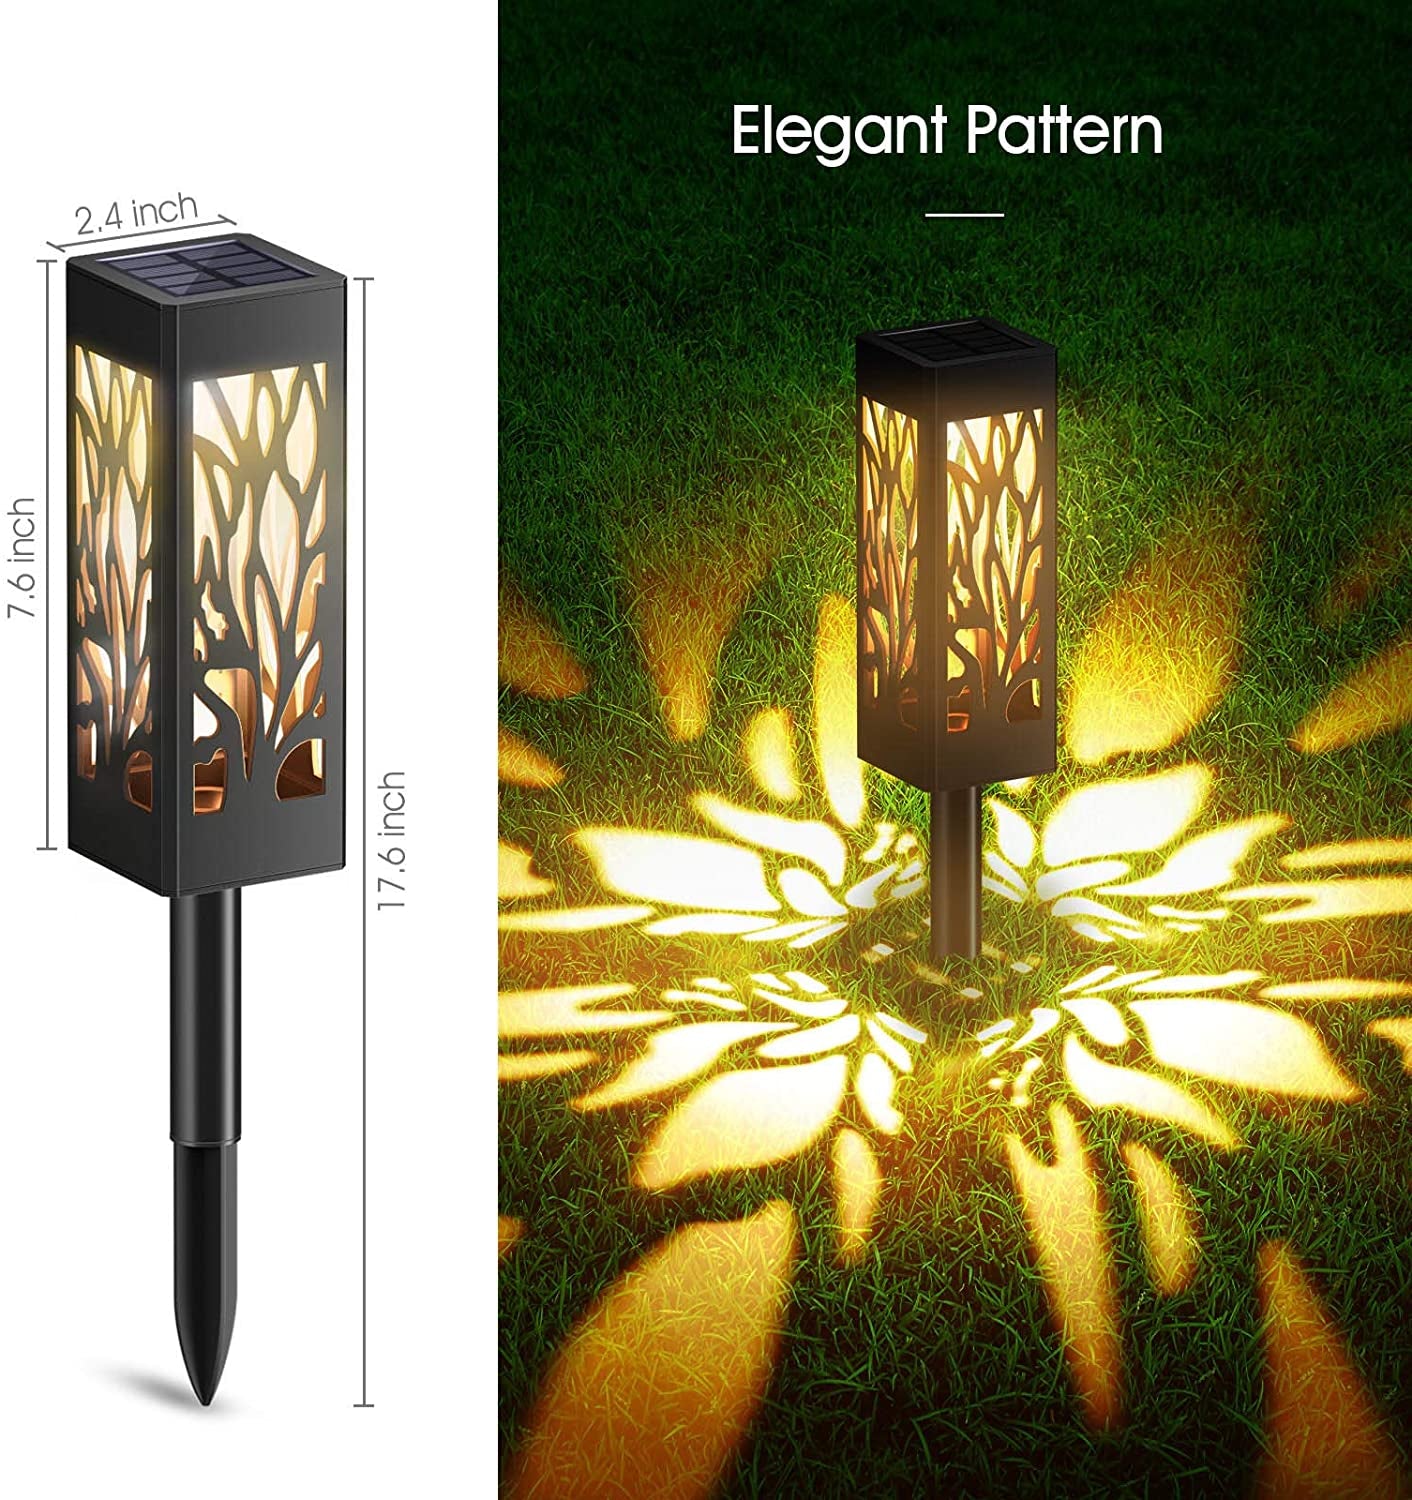 Solar Lights Outdoor Upgraded Solar Pathway Lights with Longer Working Time Waterproof Solar Garden Lights for Landscape Path